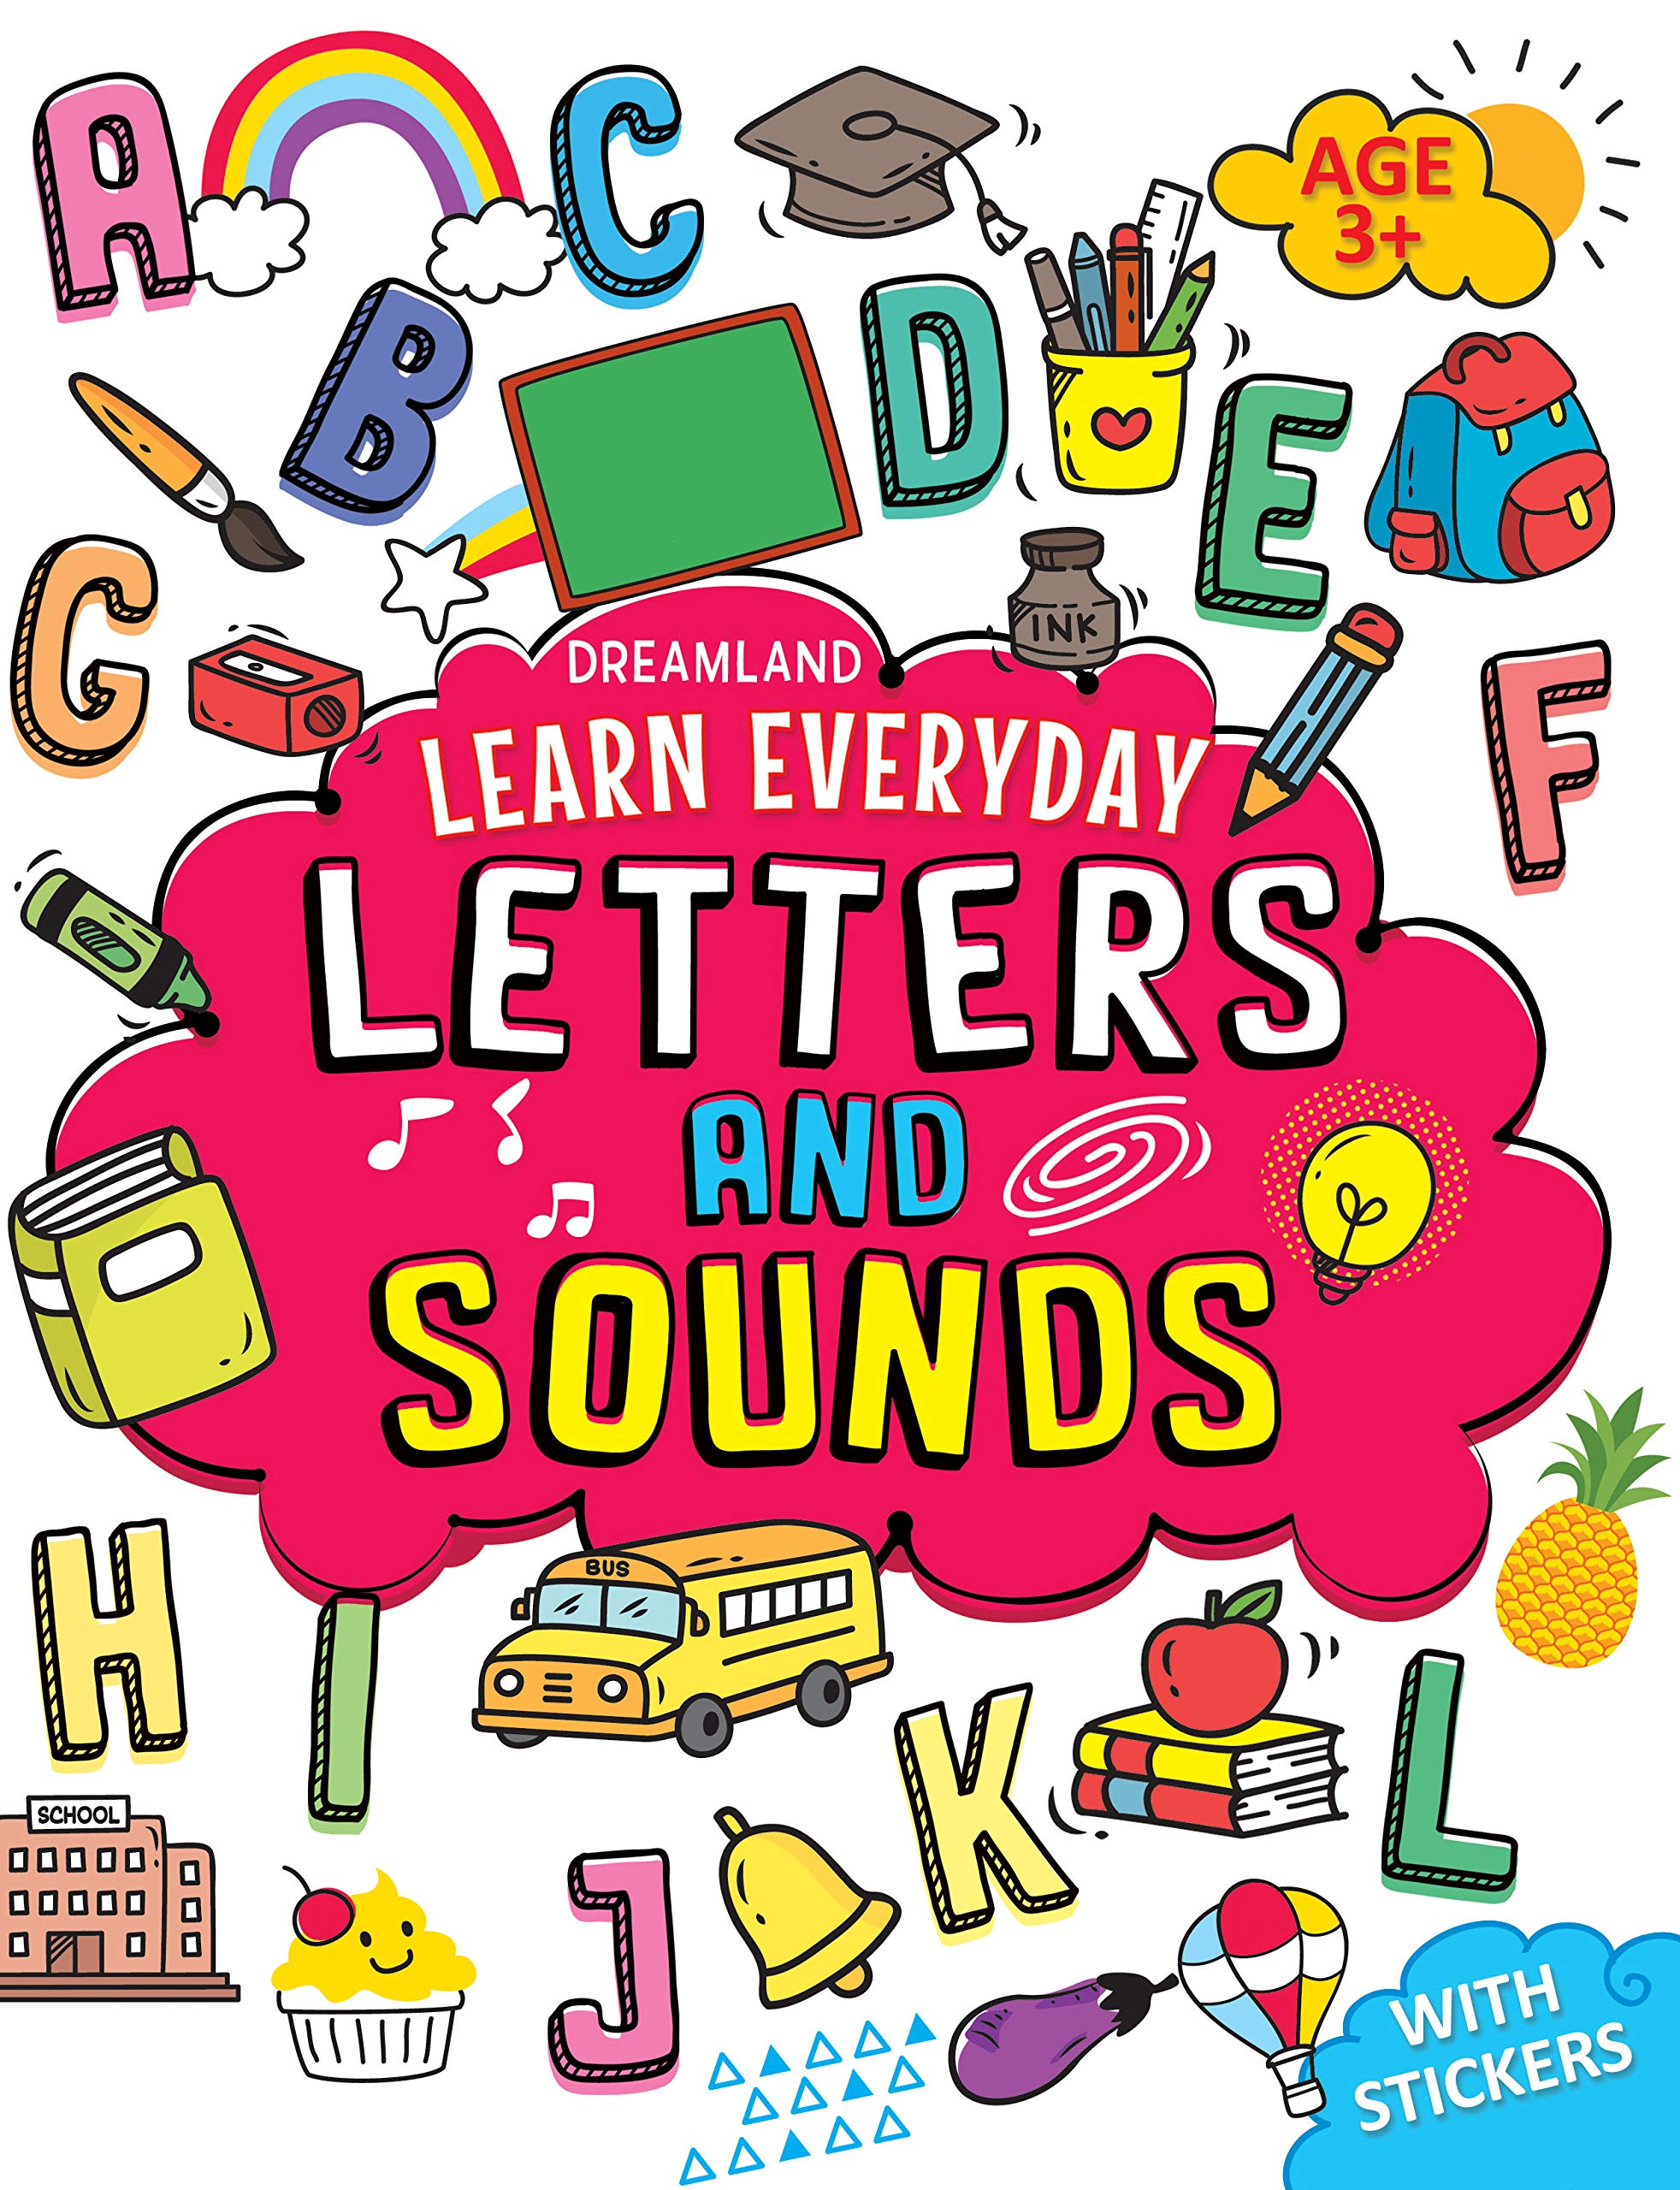 Letters and Sounds with stickers - Learn Everyday Series For Children Paperback